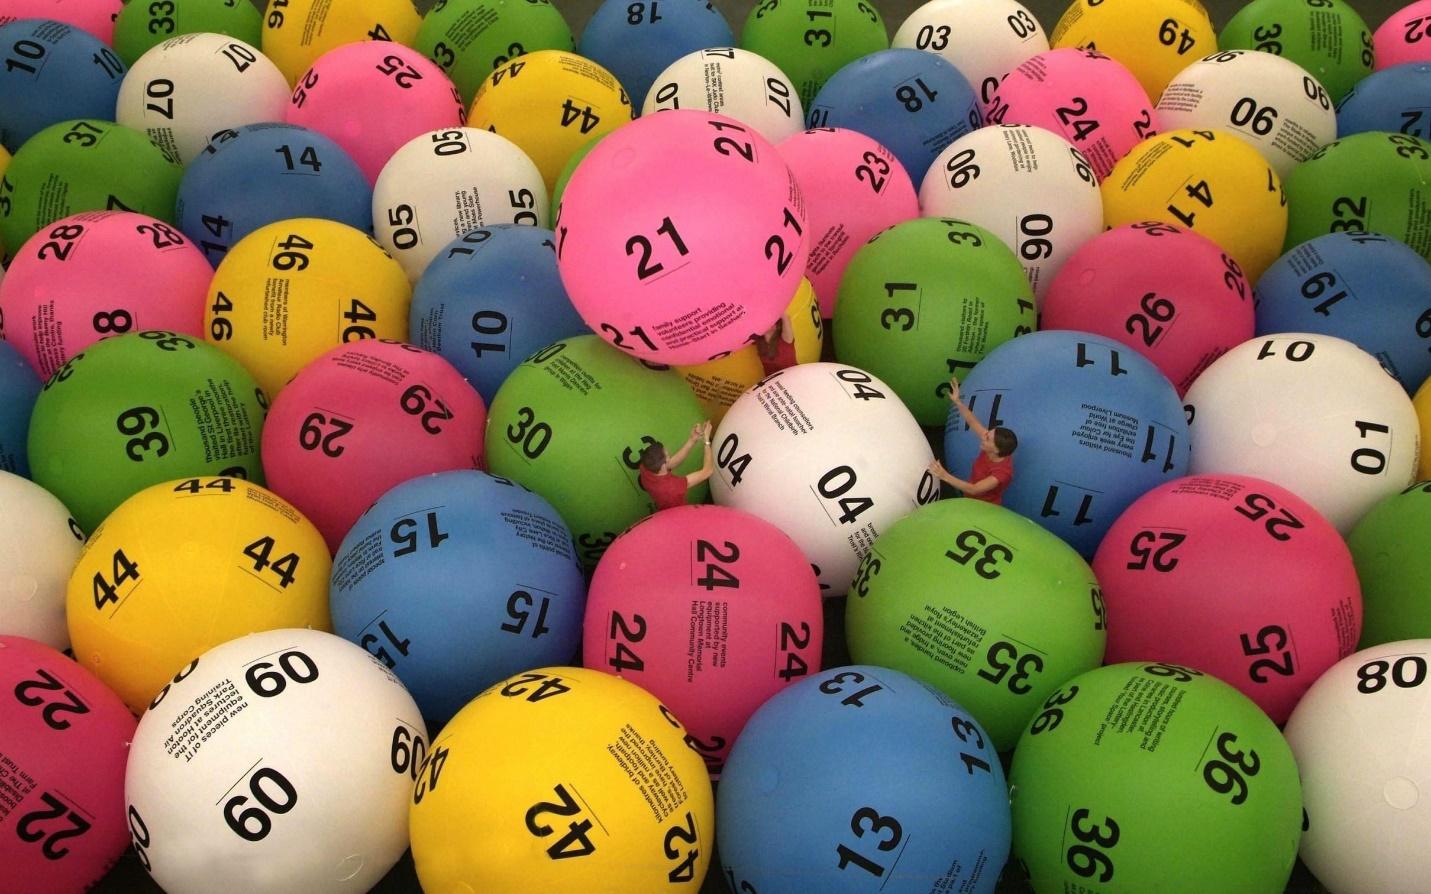 How to pick lottery numbers and win: 8 ways to increase your chances